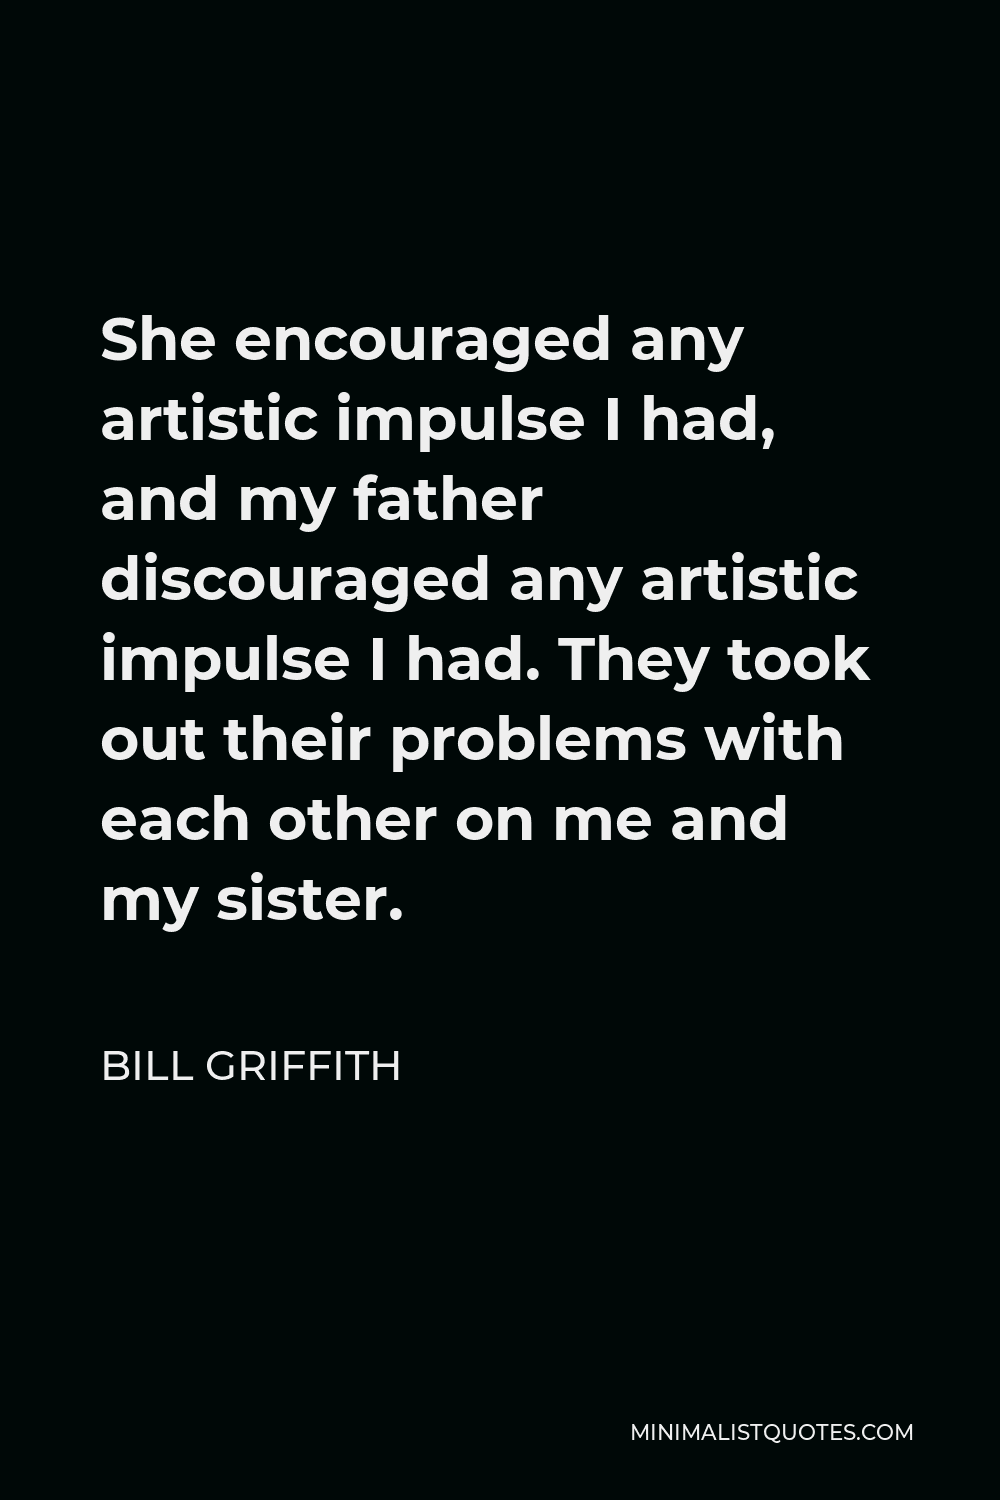 Bill Griffith Quote - She encouraged any artistic impulse I had, and my father discouraged any artistic impulse I had. They took out their problems with each other on me and my sister.